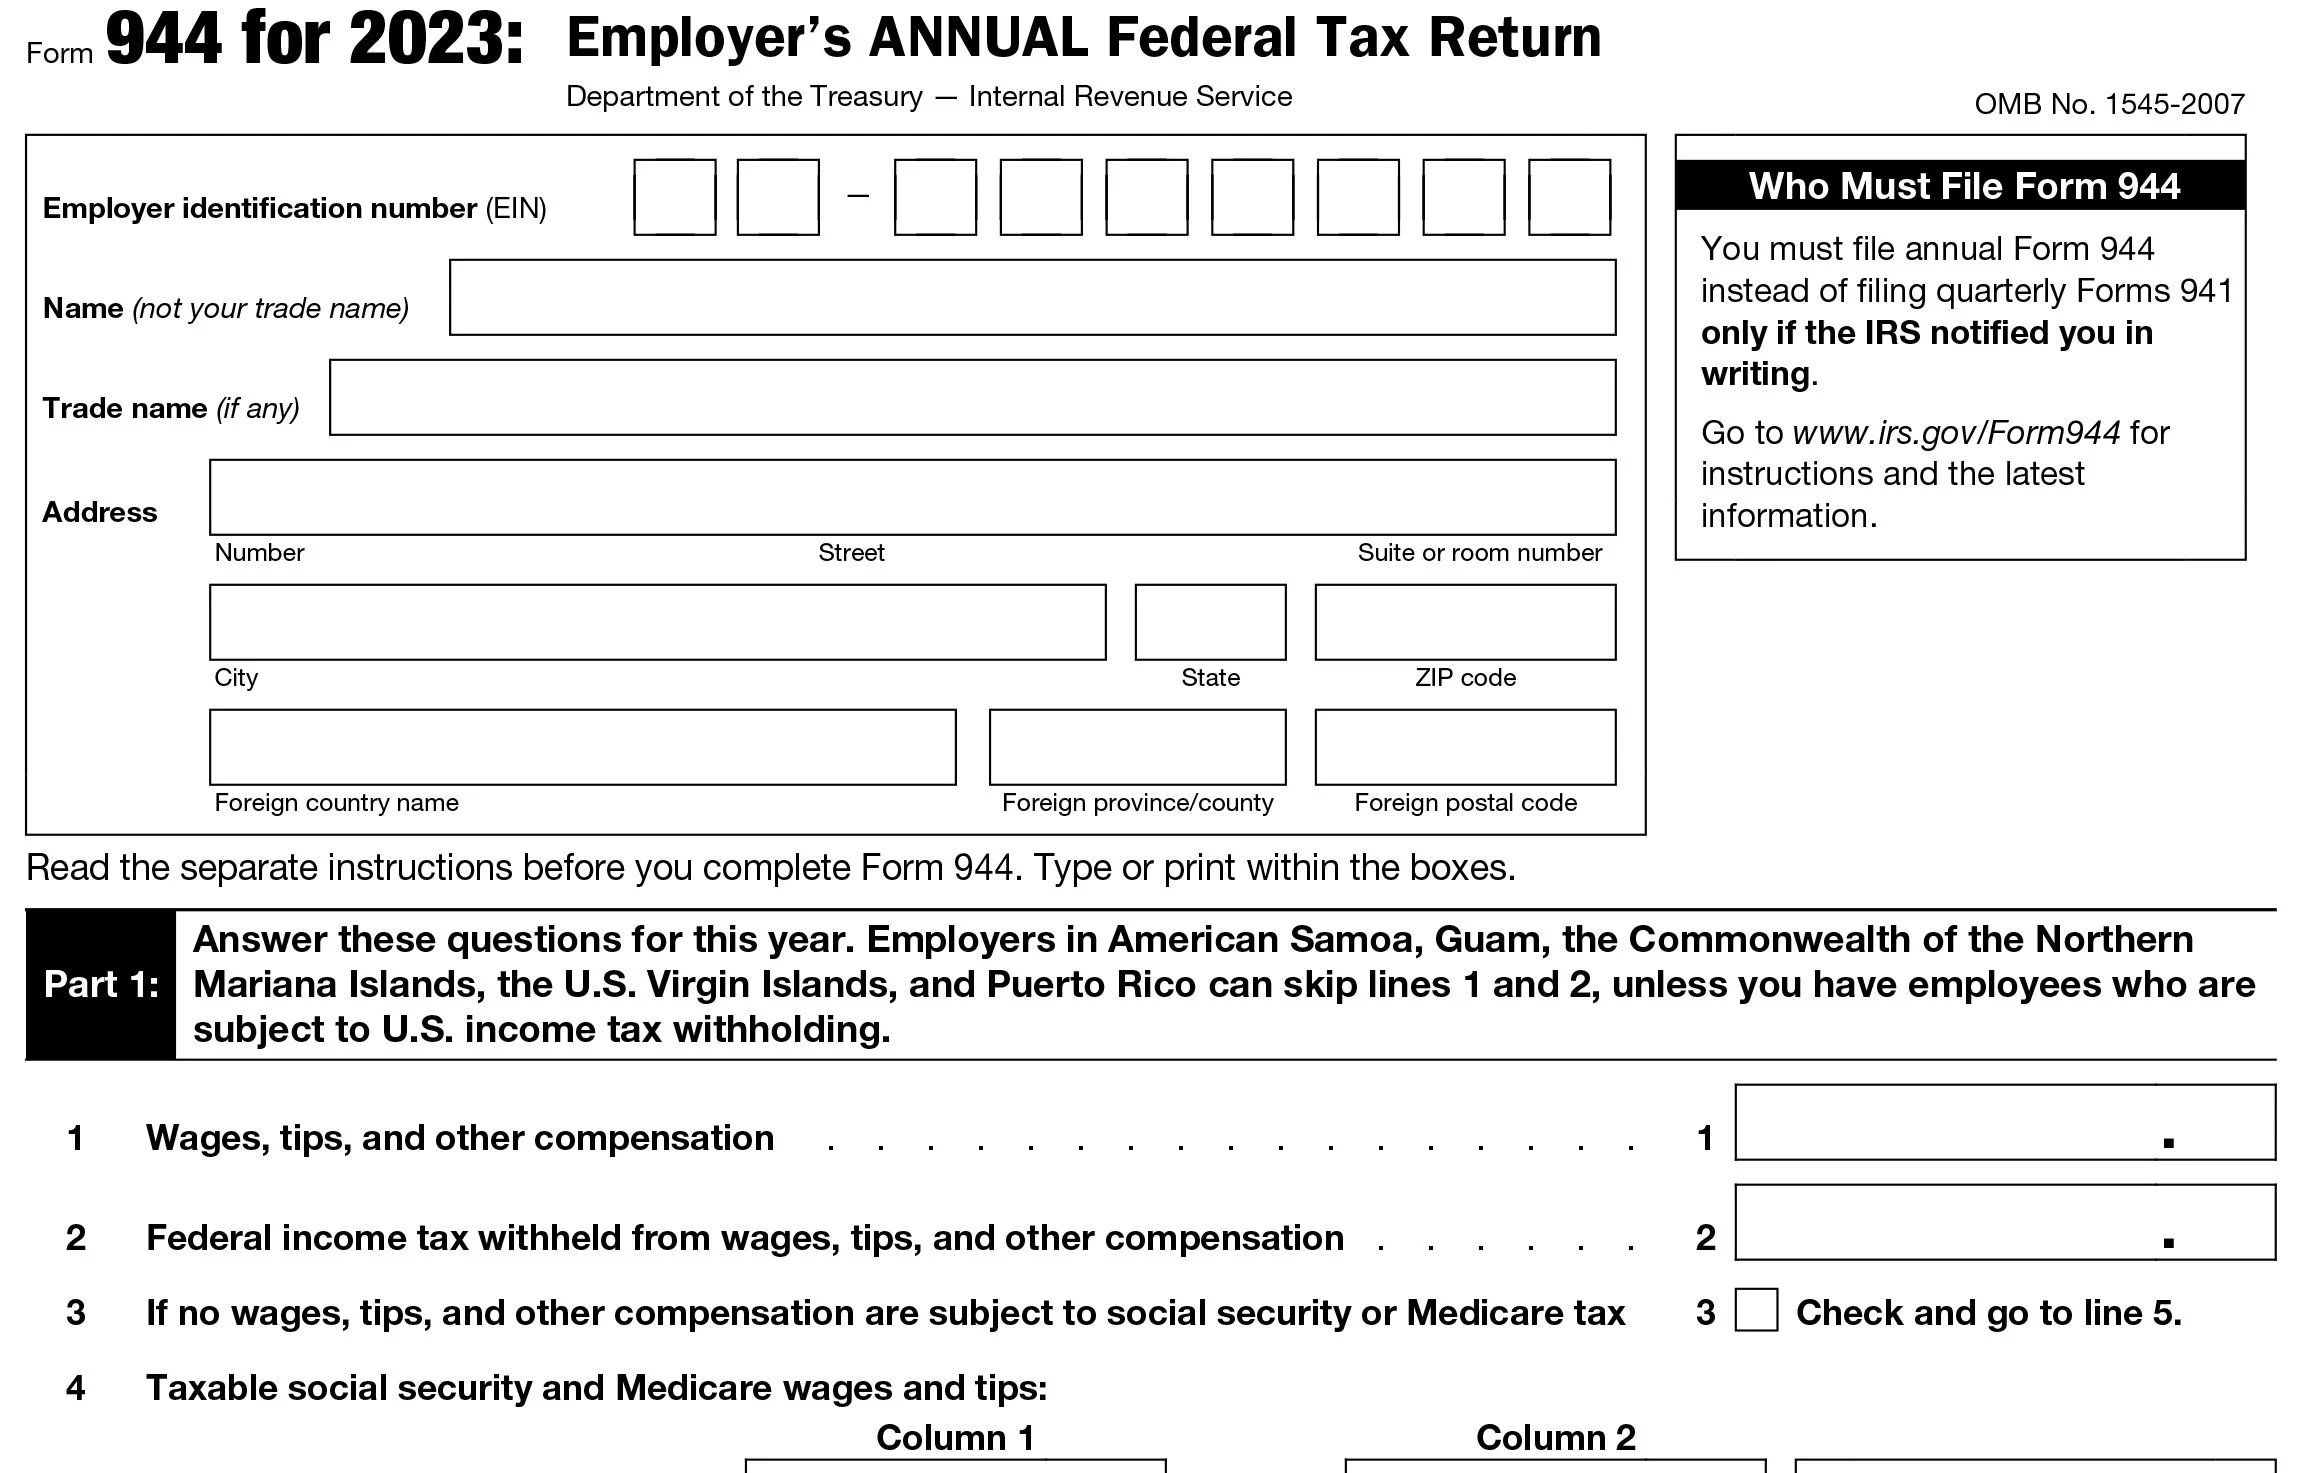 What is Form 944?